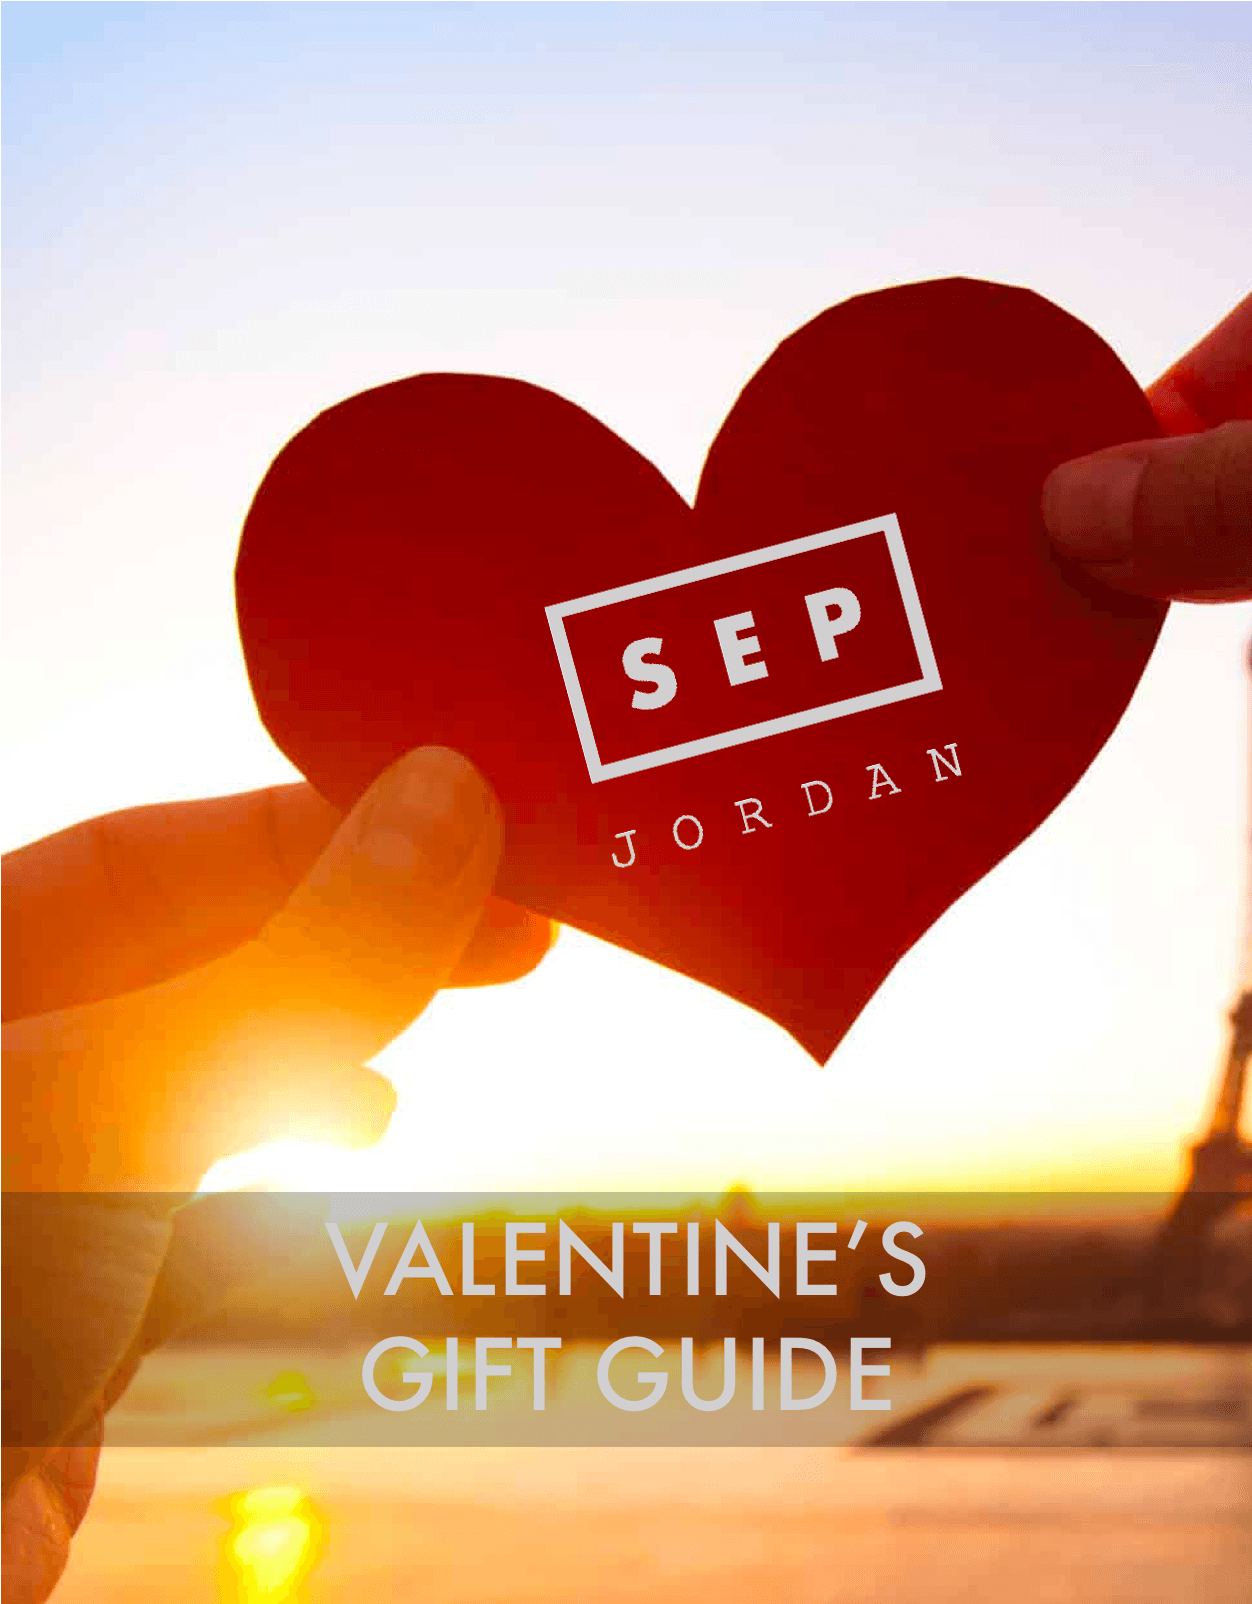 The best SEP gifts for your Valentine